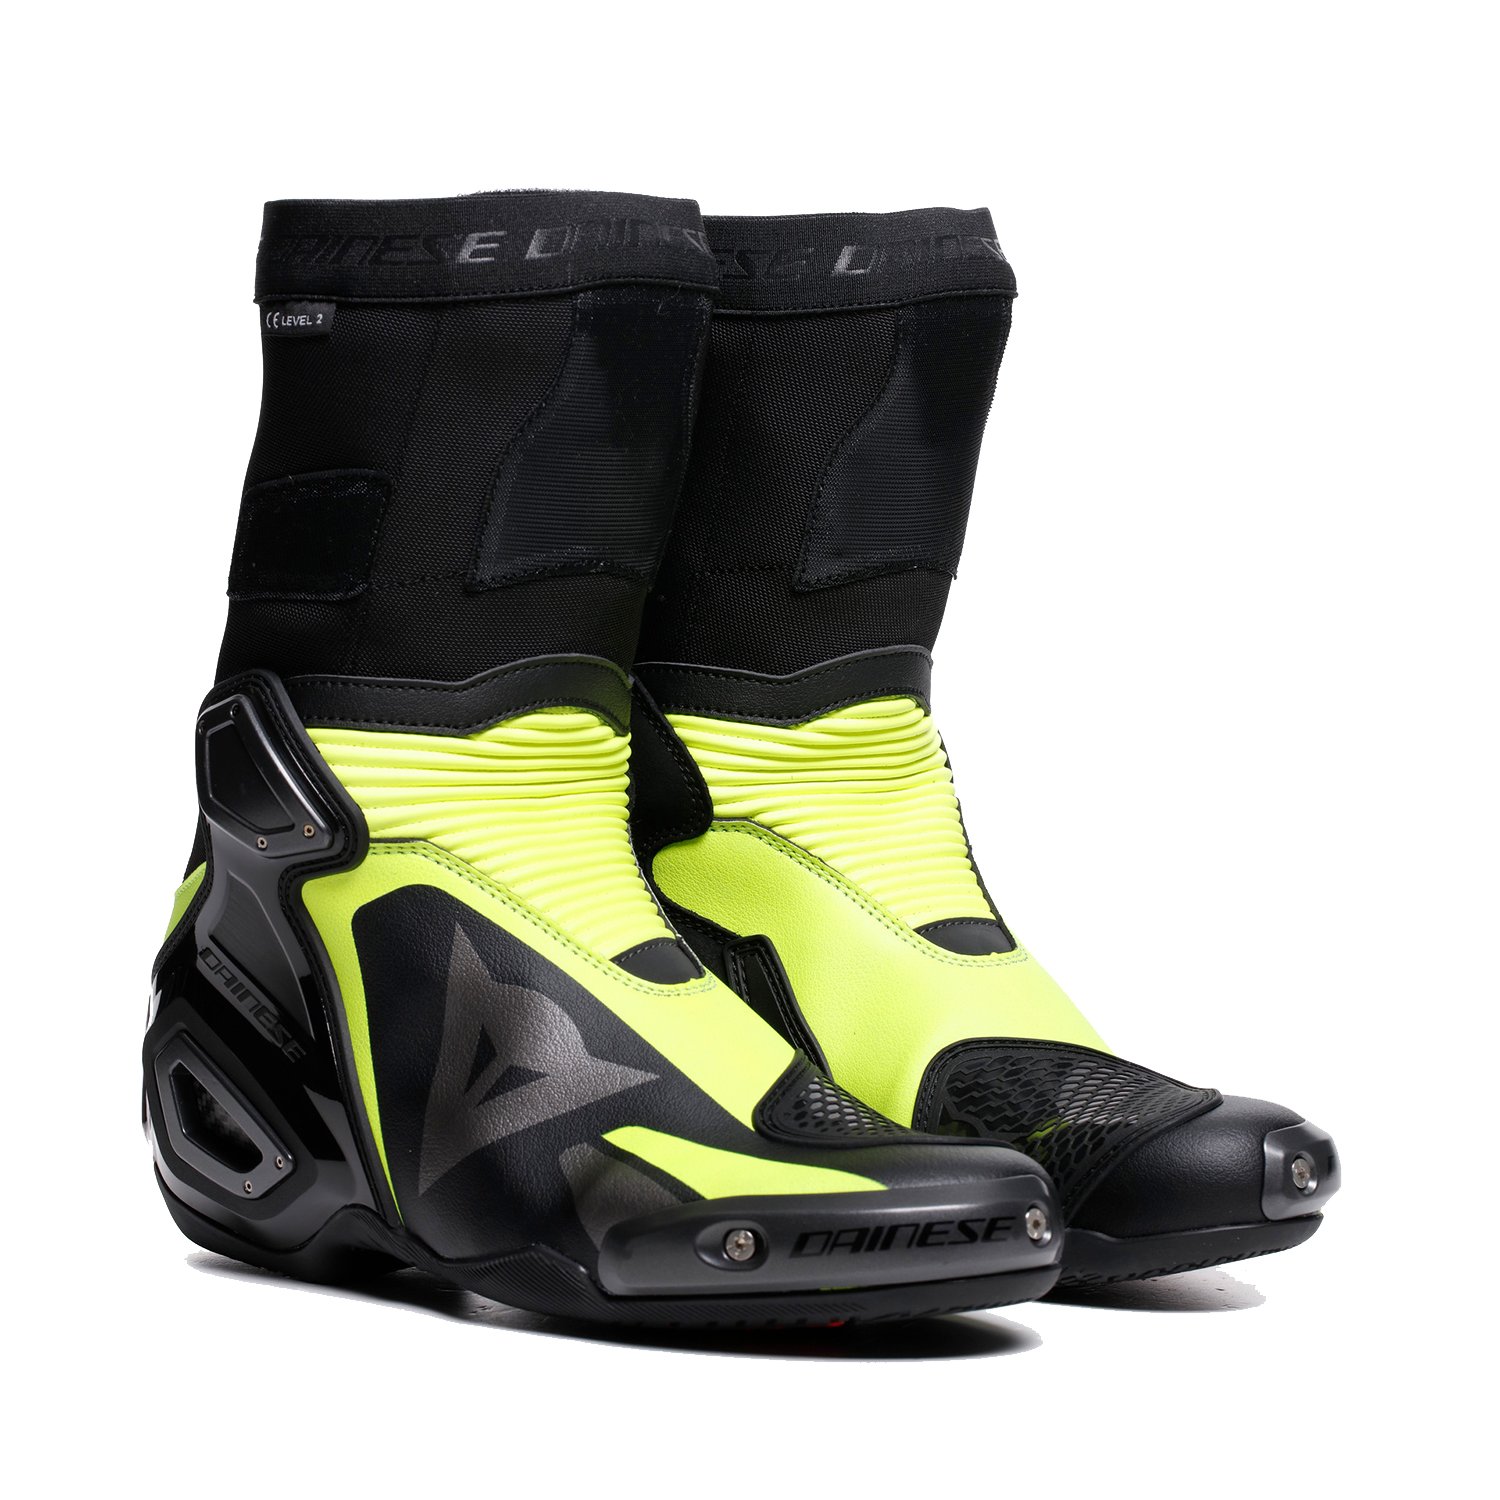 Image of Dainese Axial 2 Boots Black Yellow Fluo Size 45 ID 8051019739506